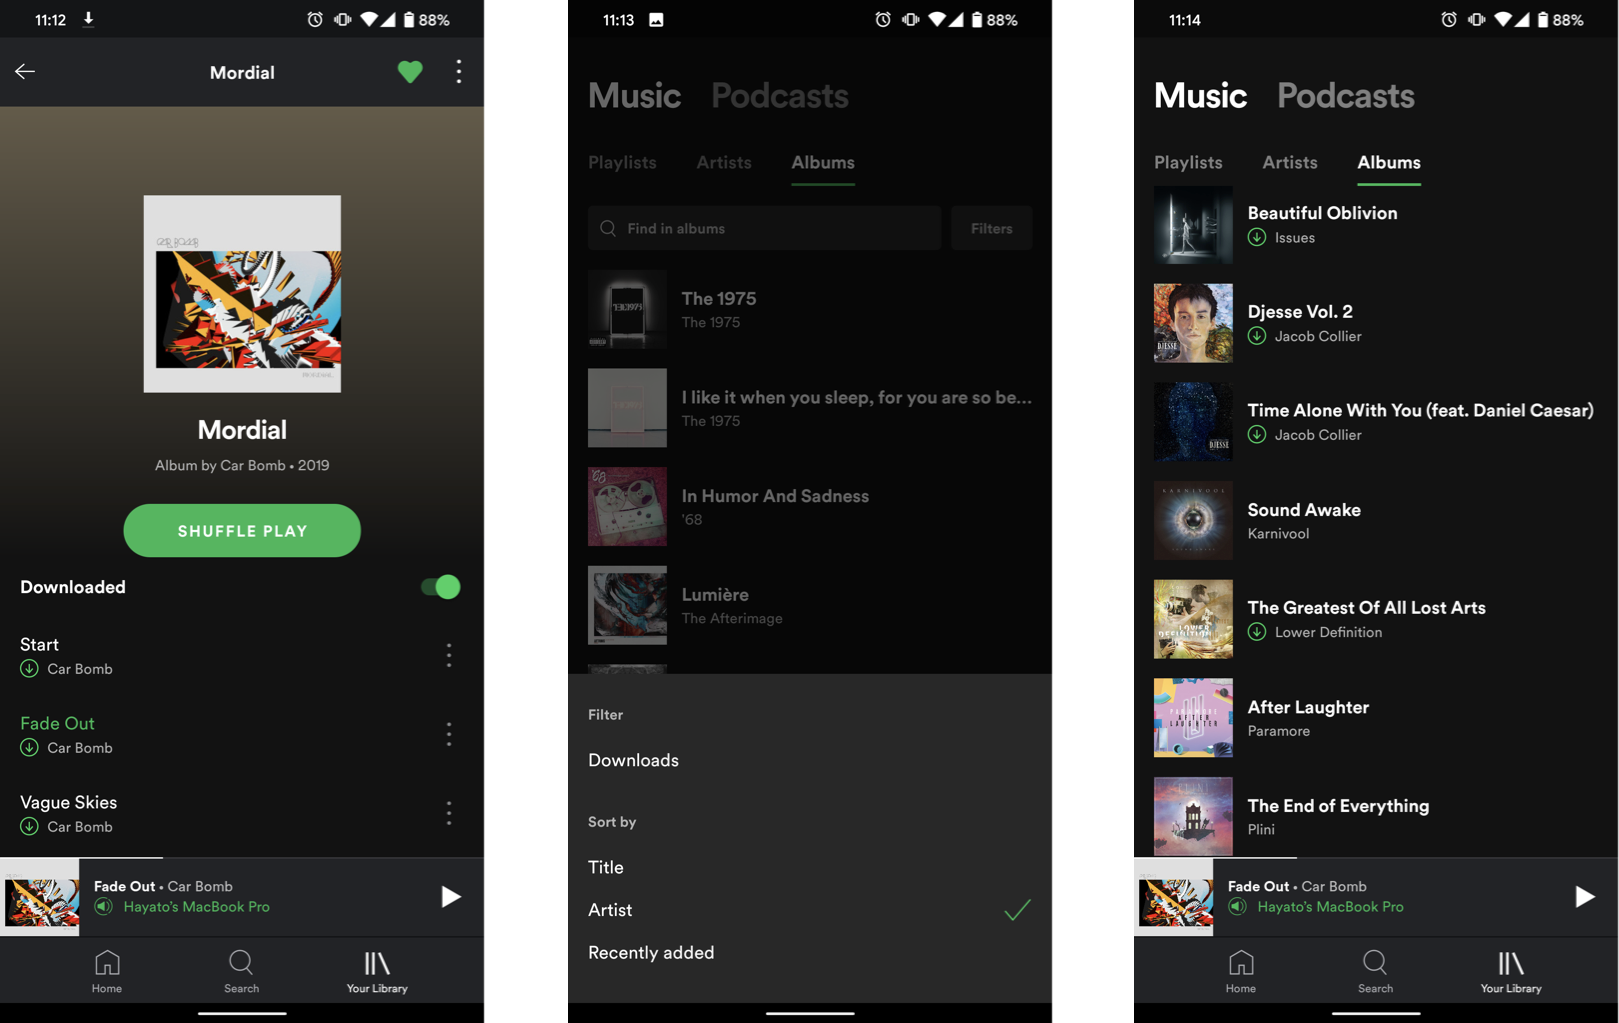 https://www.androidcentral.com/sites/androidcentral.com/files/styles/large/public/article_images/2020/01/spotify-offline-playback-filtering.png?itok=HDFf1y5Q